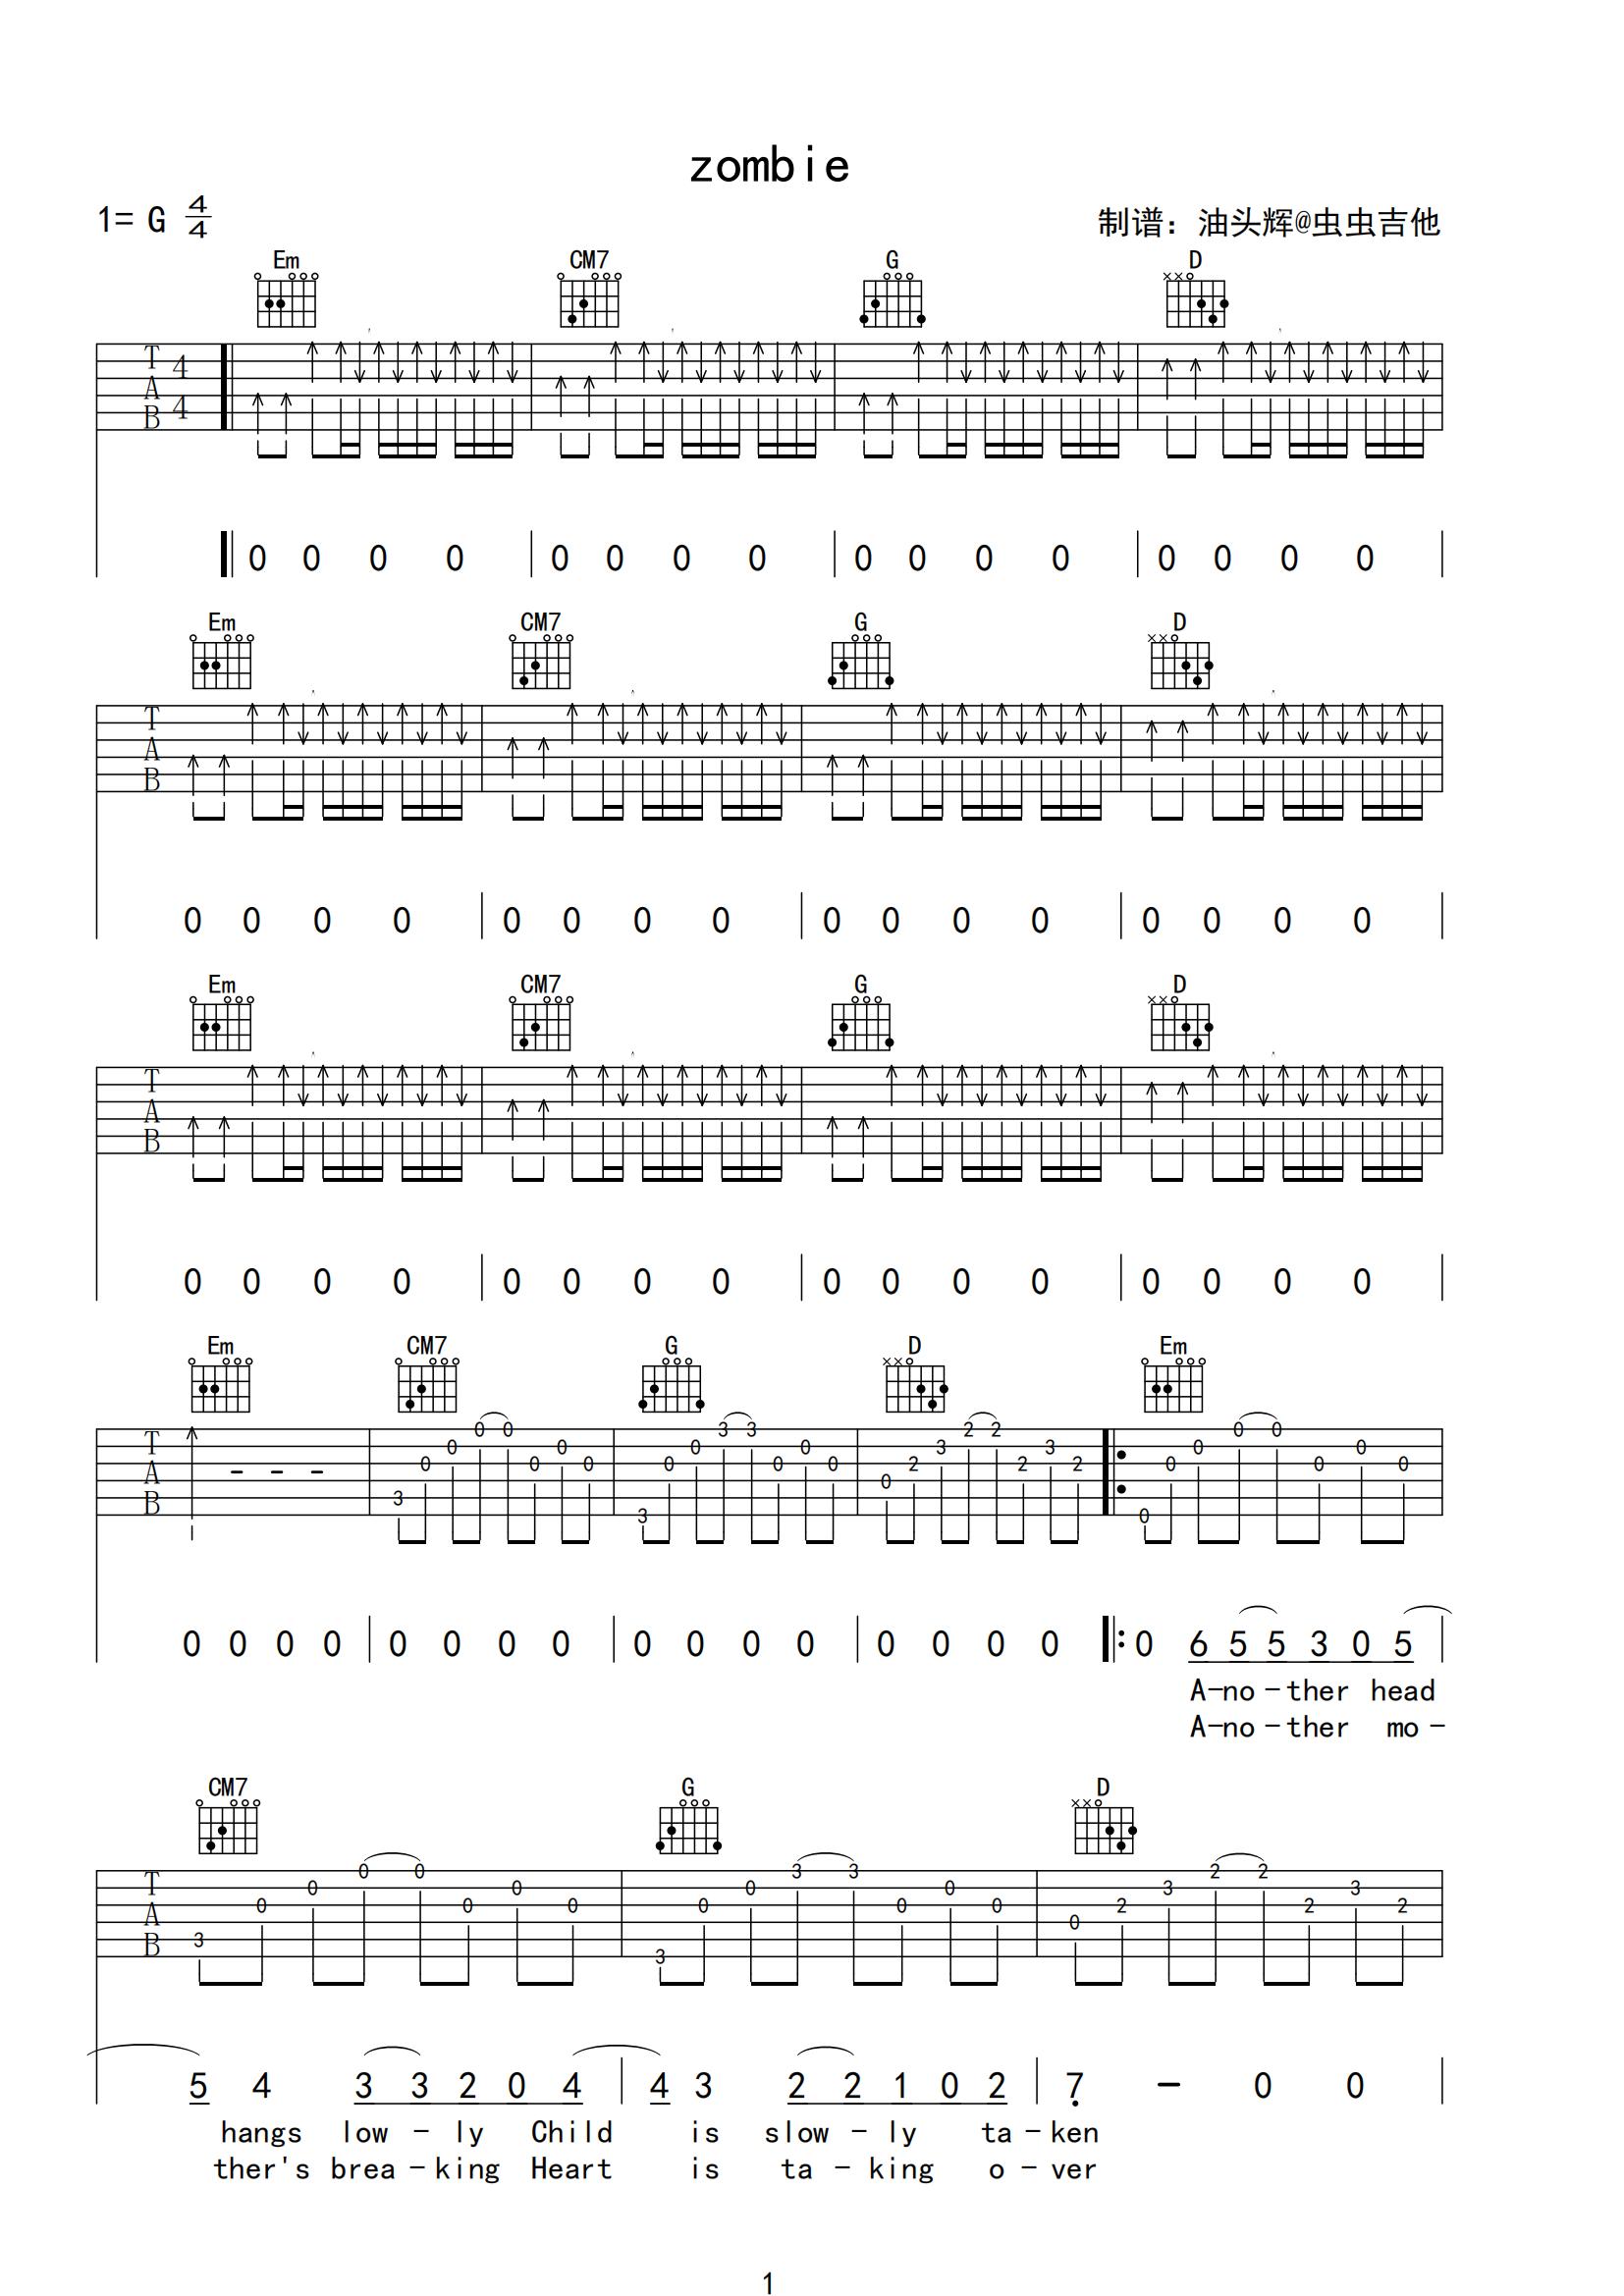 Zombie by The Cranberries - Guitar Tab - Guitar Instructor